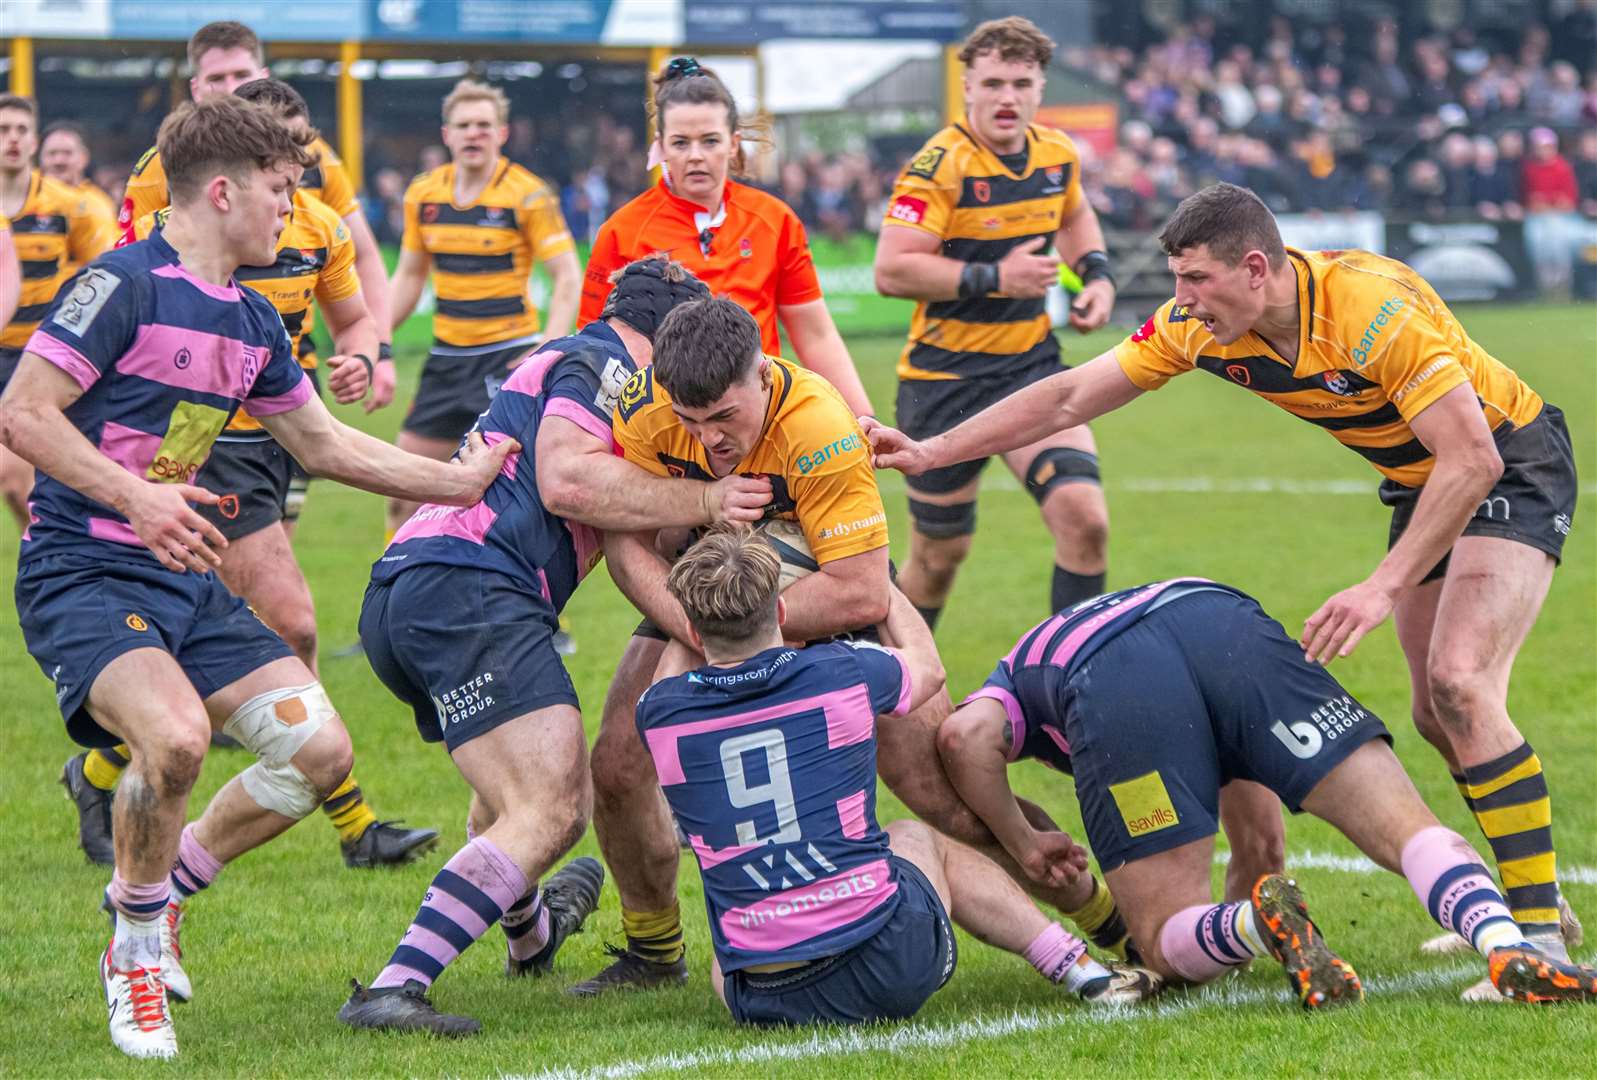 Canterbury Rugby Club’s Eoin O’Donoghue gets stuck in against Sevenoaks during a 34-21 bonus-point home win last month. Picture: Phillipa Hilton